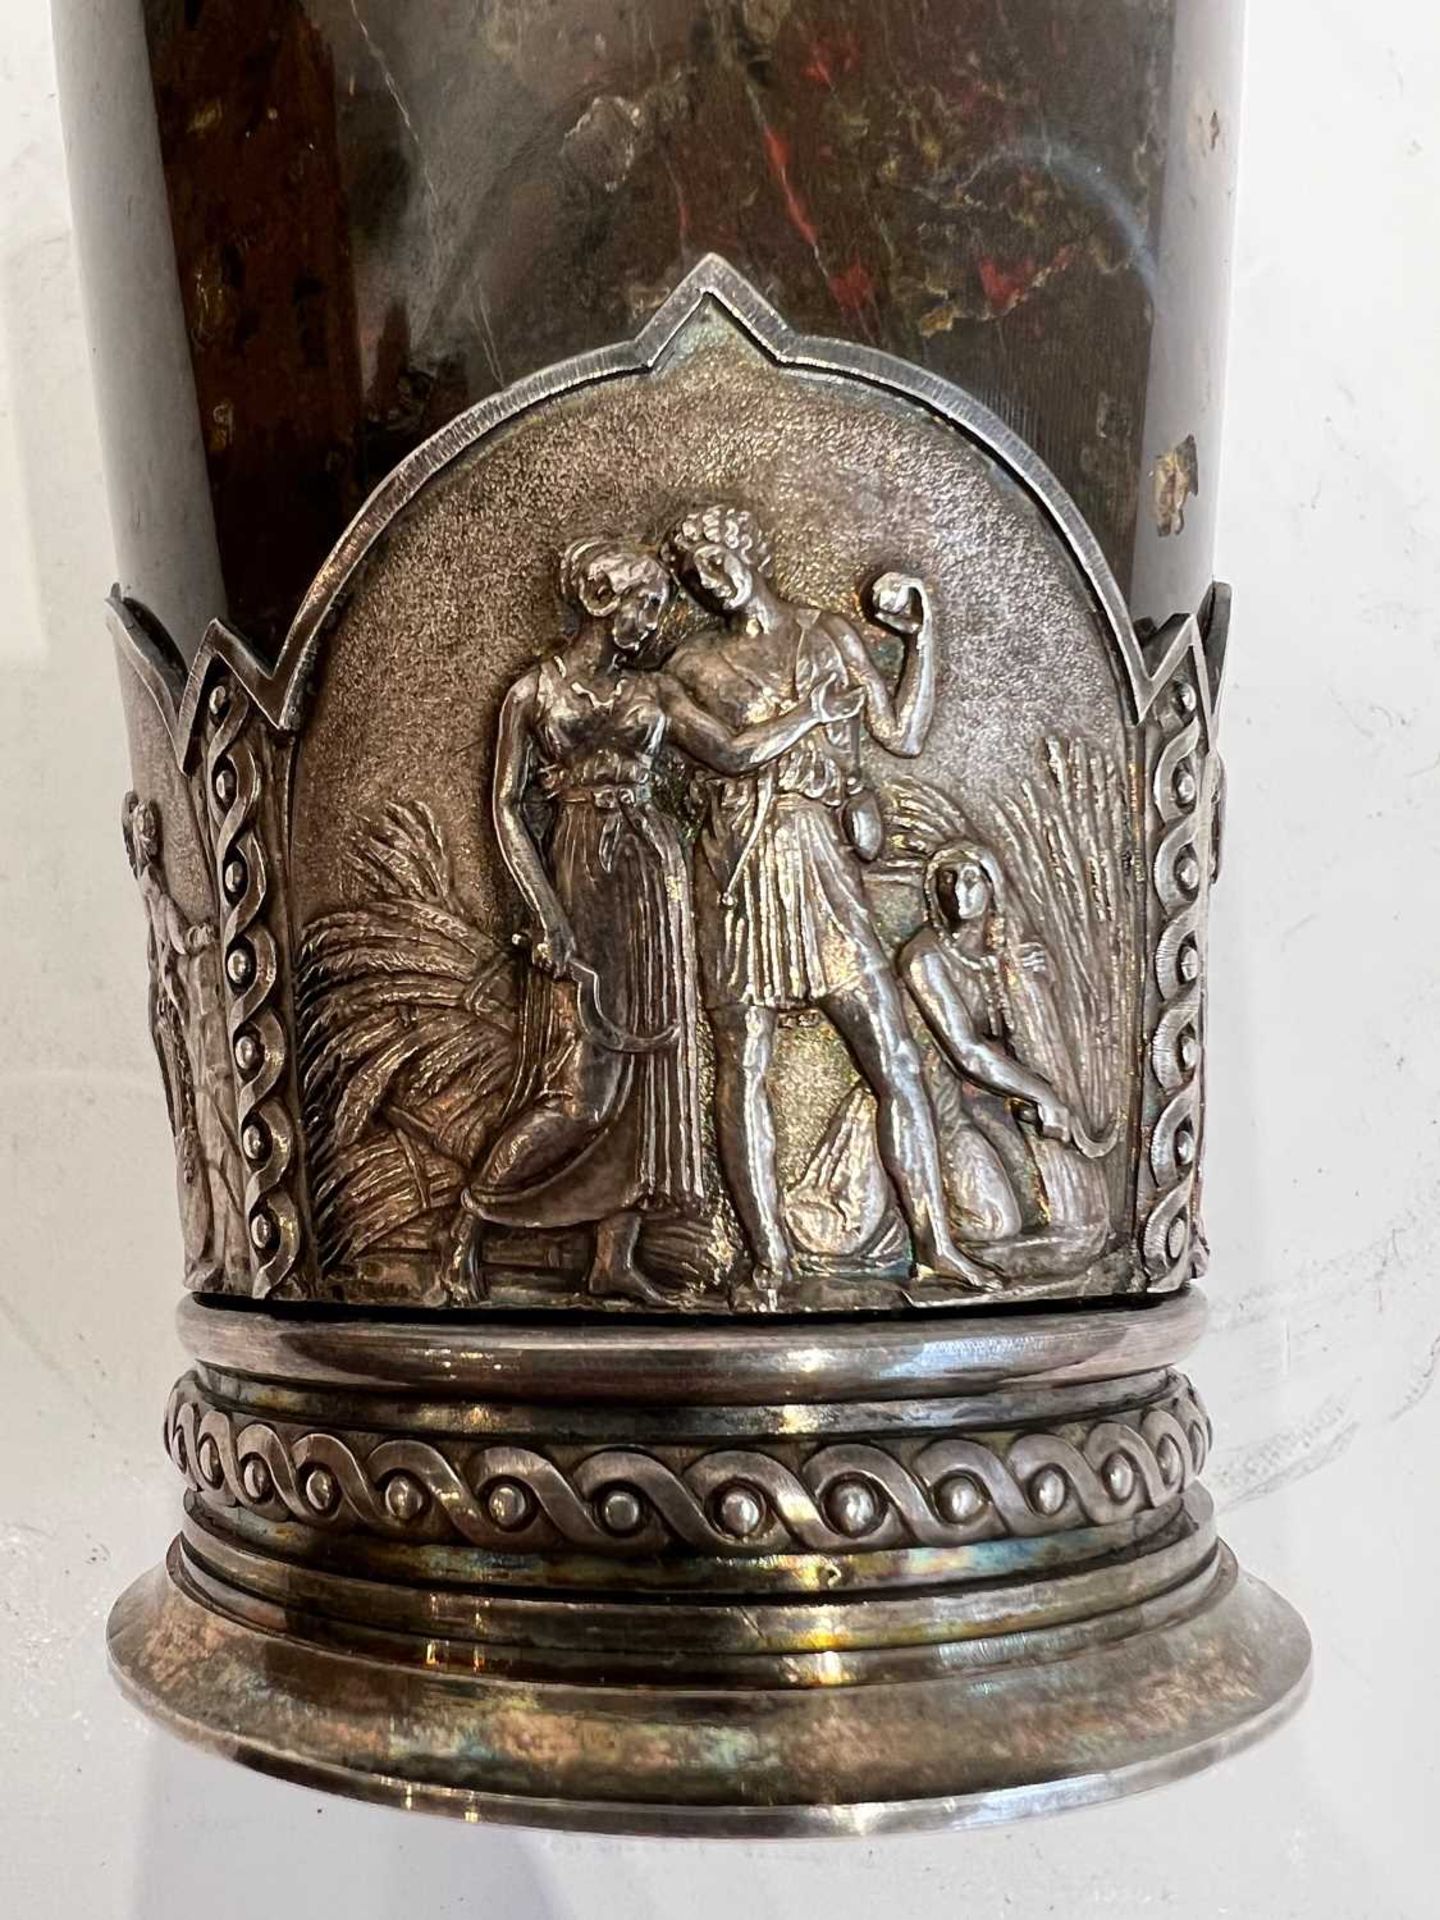 THE FOUR SEASONS CUP: A FINE 19TH CENTURY SILVER MOUNTED CUP WITH RELIEFS AFTER THORVALDSEN - Image 5 of 6